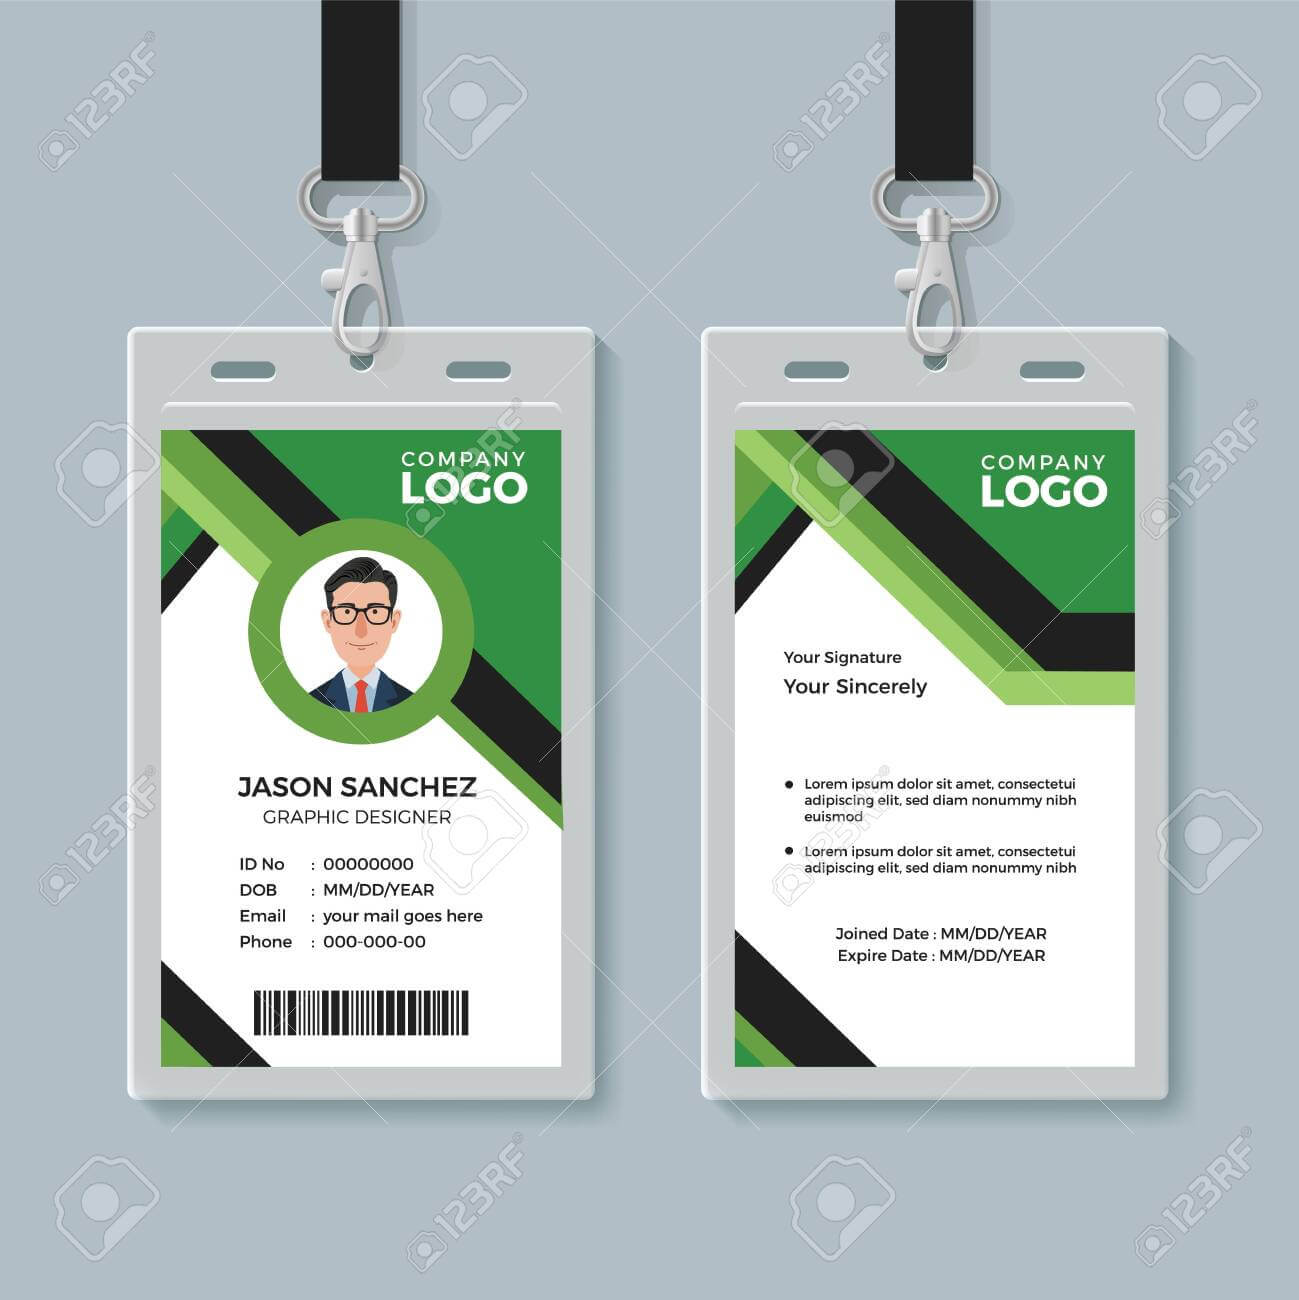 Simple Corporate Office Identity Card Design Template With Regard To Company Id Card Design Template